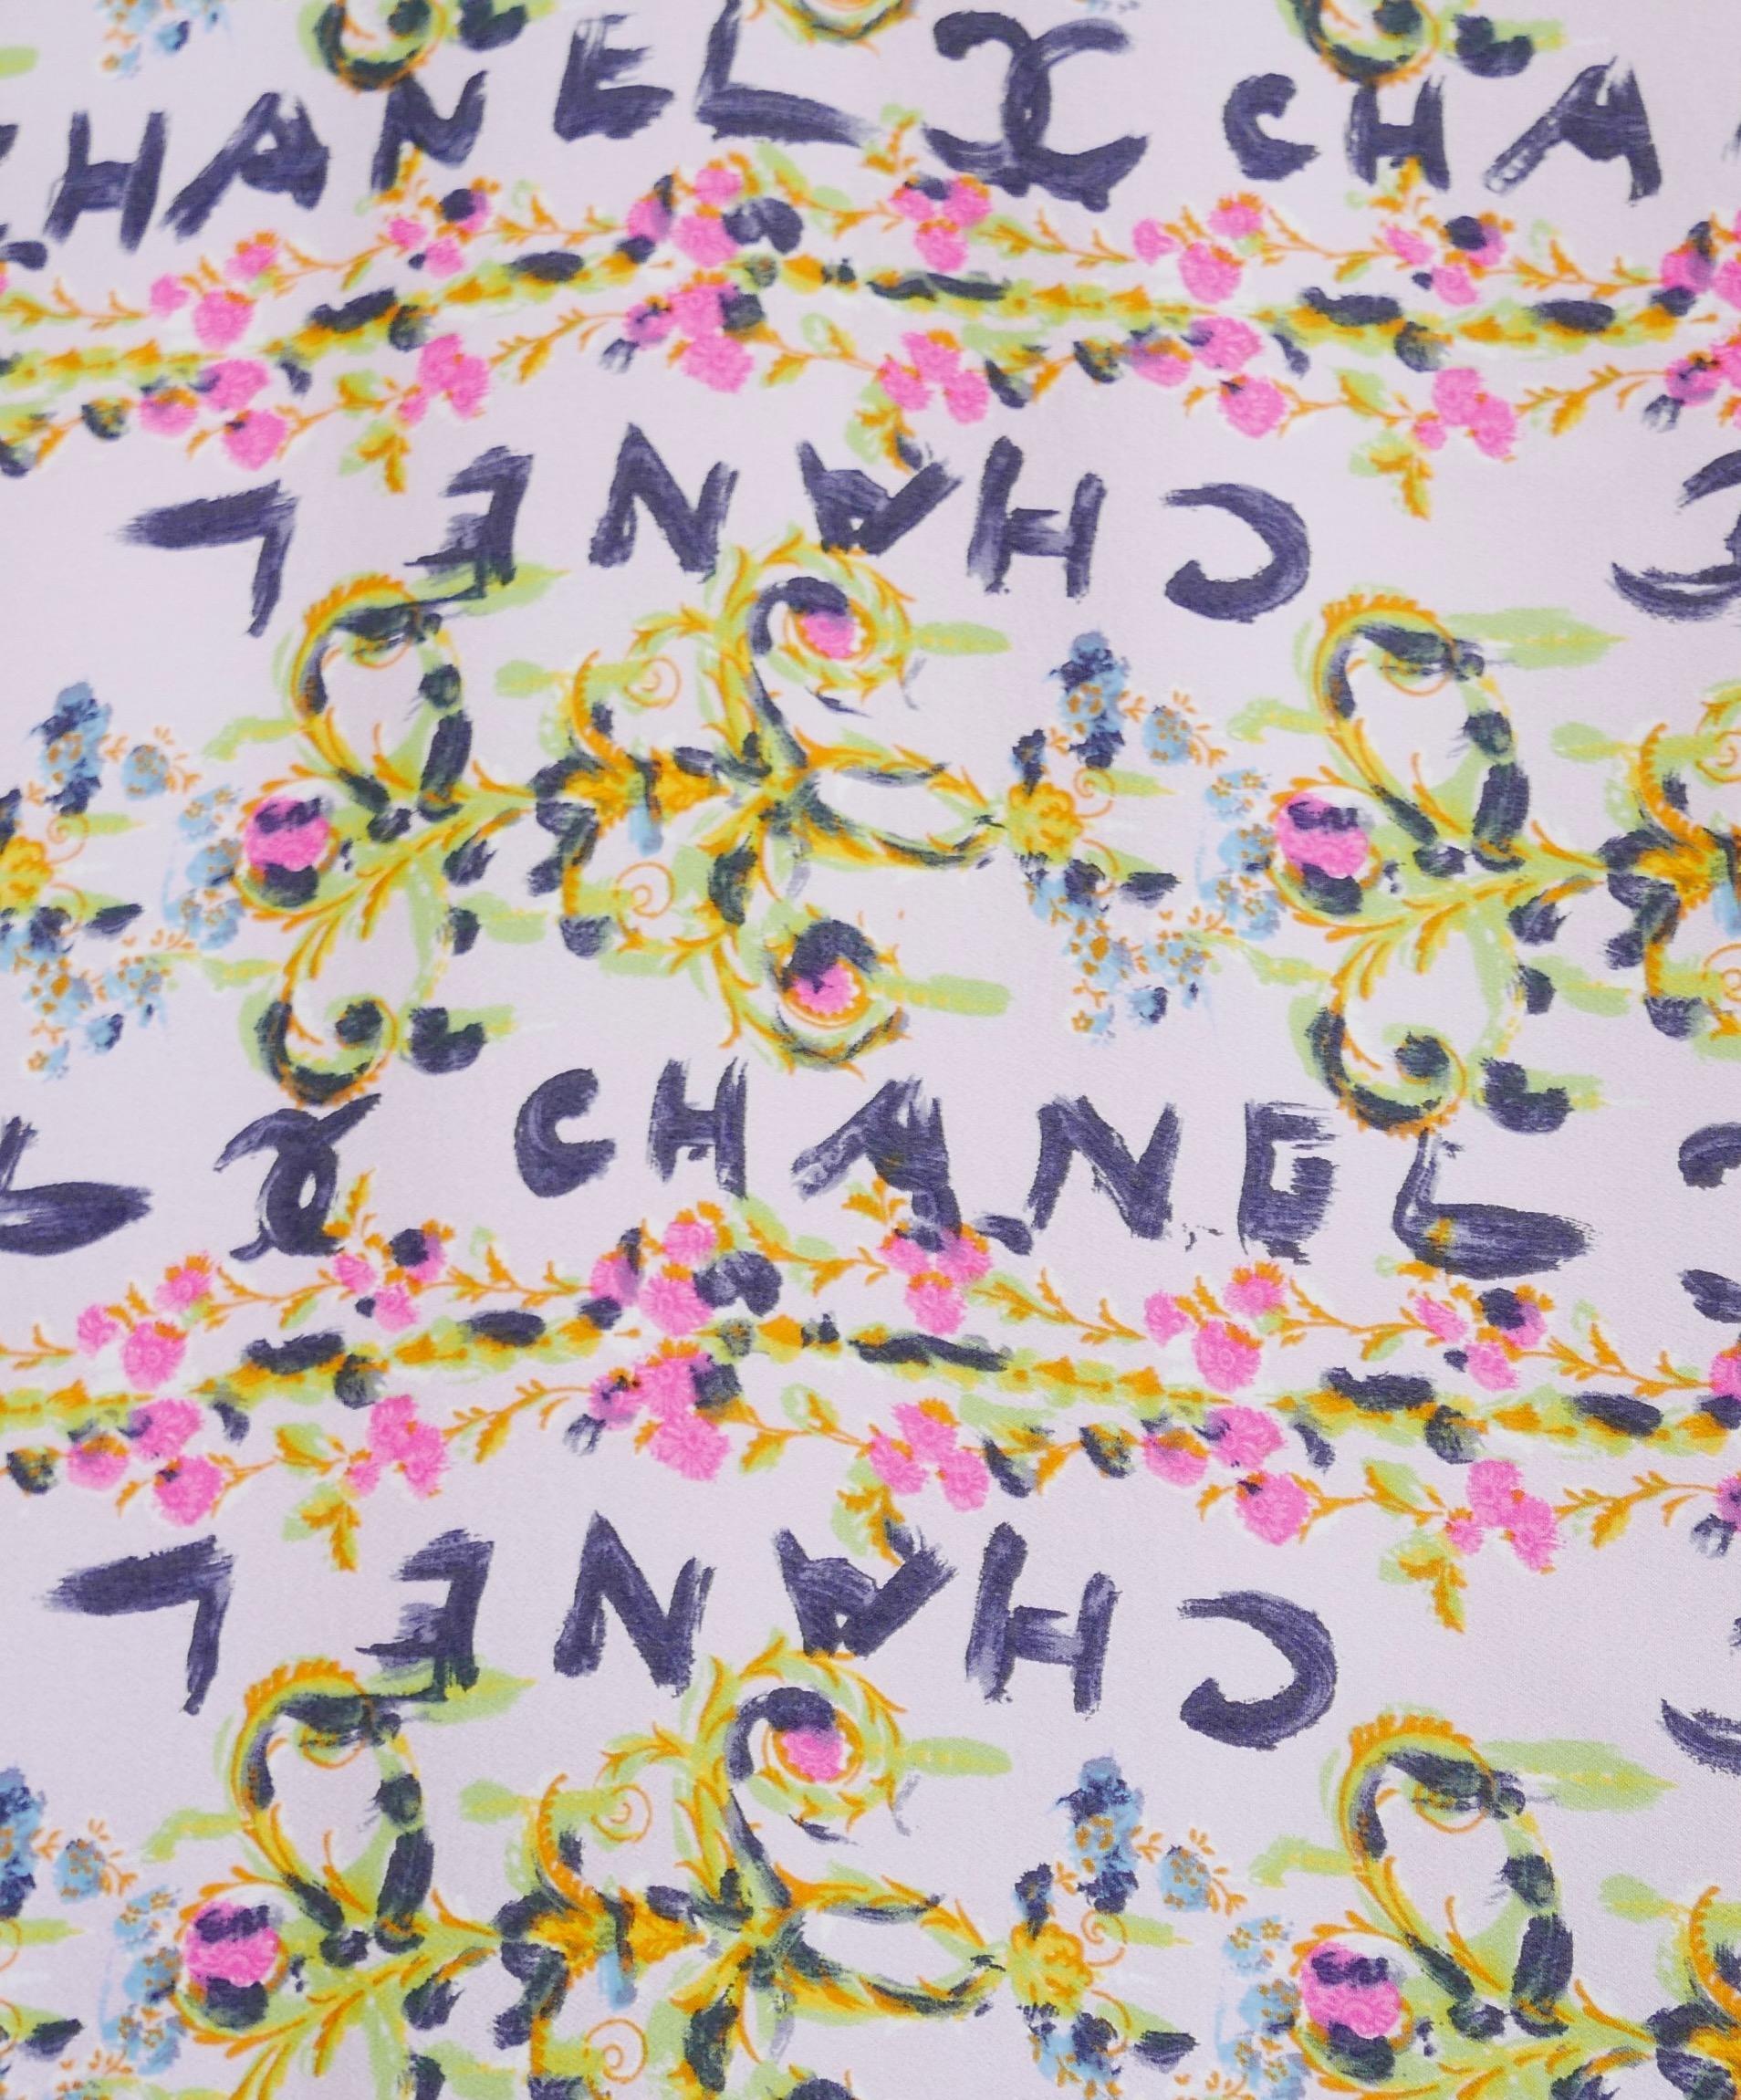 Rarest vintage Chanel shawl scarf from the Cruise 1994 collection - brand new with tags! I doubt you’ll ever see one like this again. Made from super soft pink silk with painterly swagged floral logo print and black and white braided edging. Very